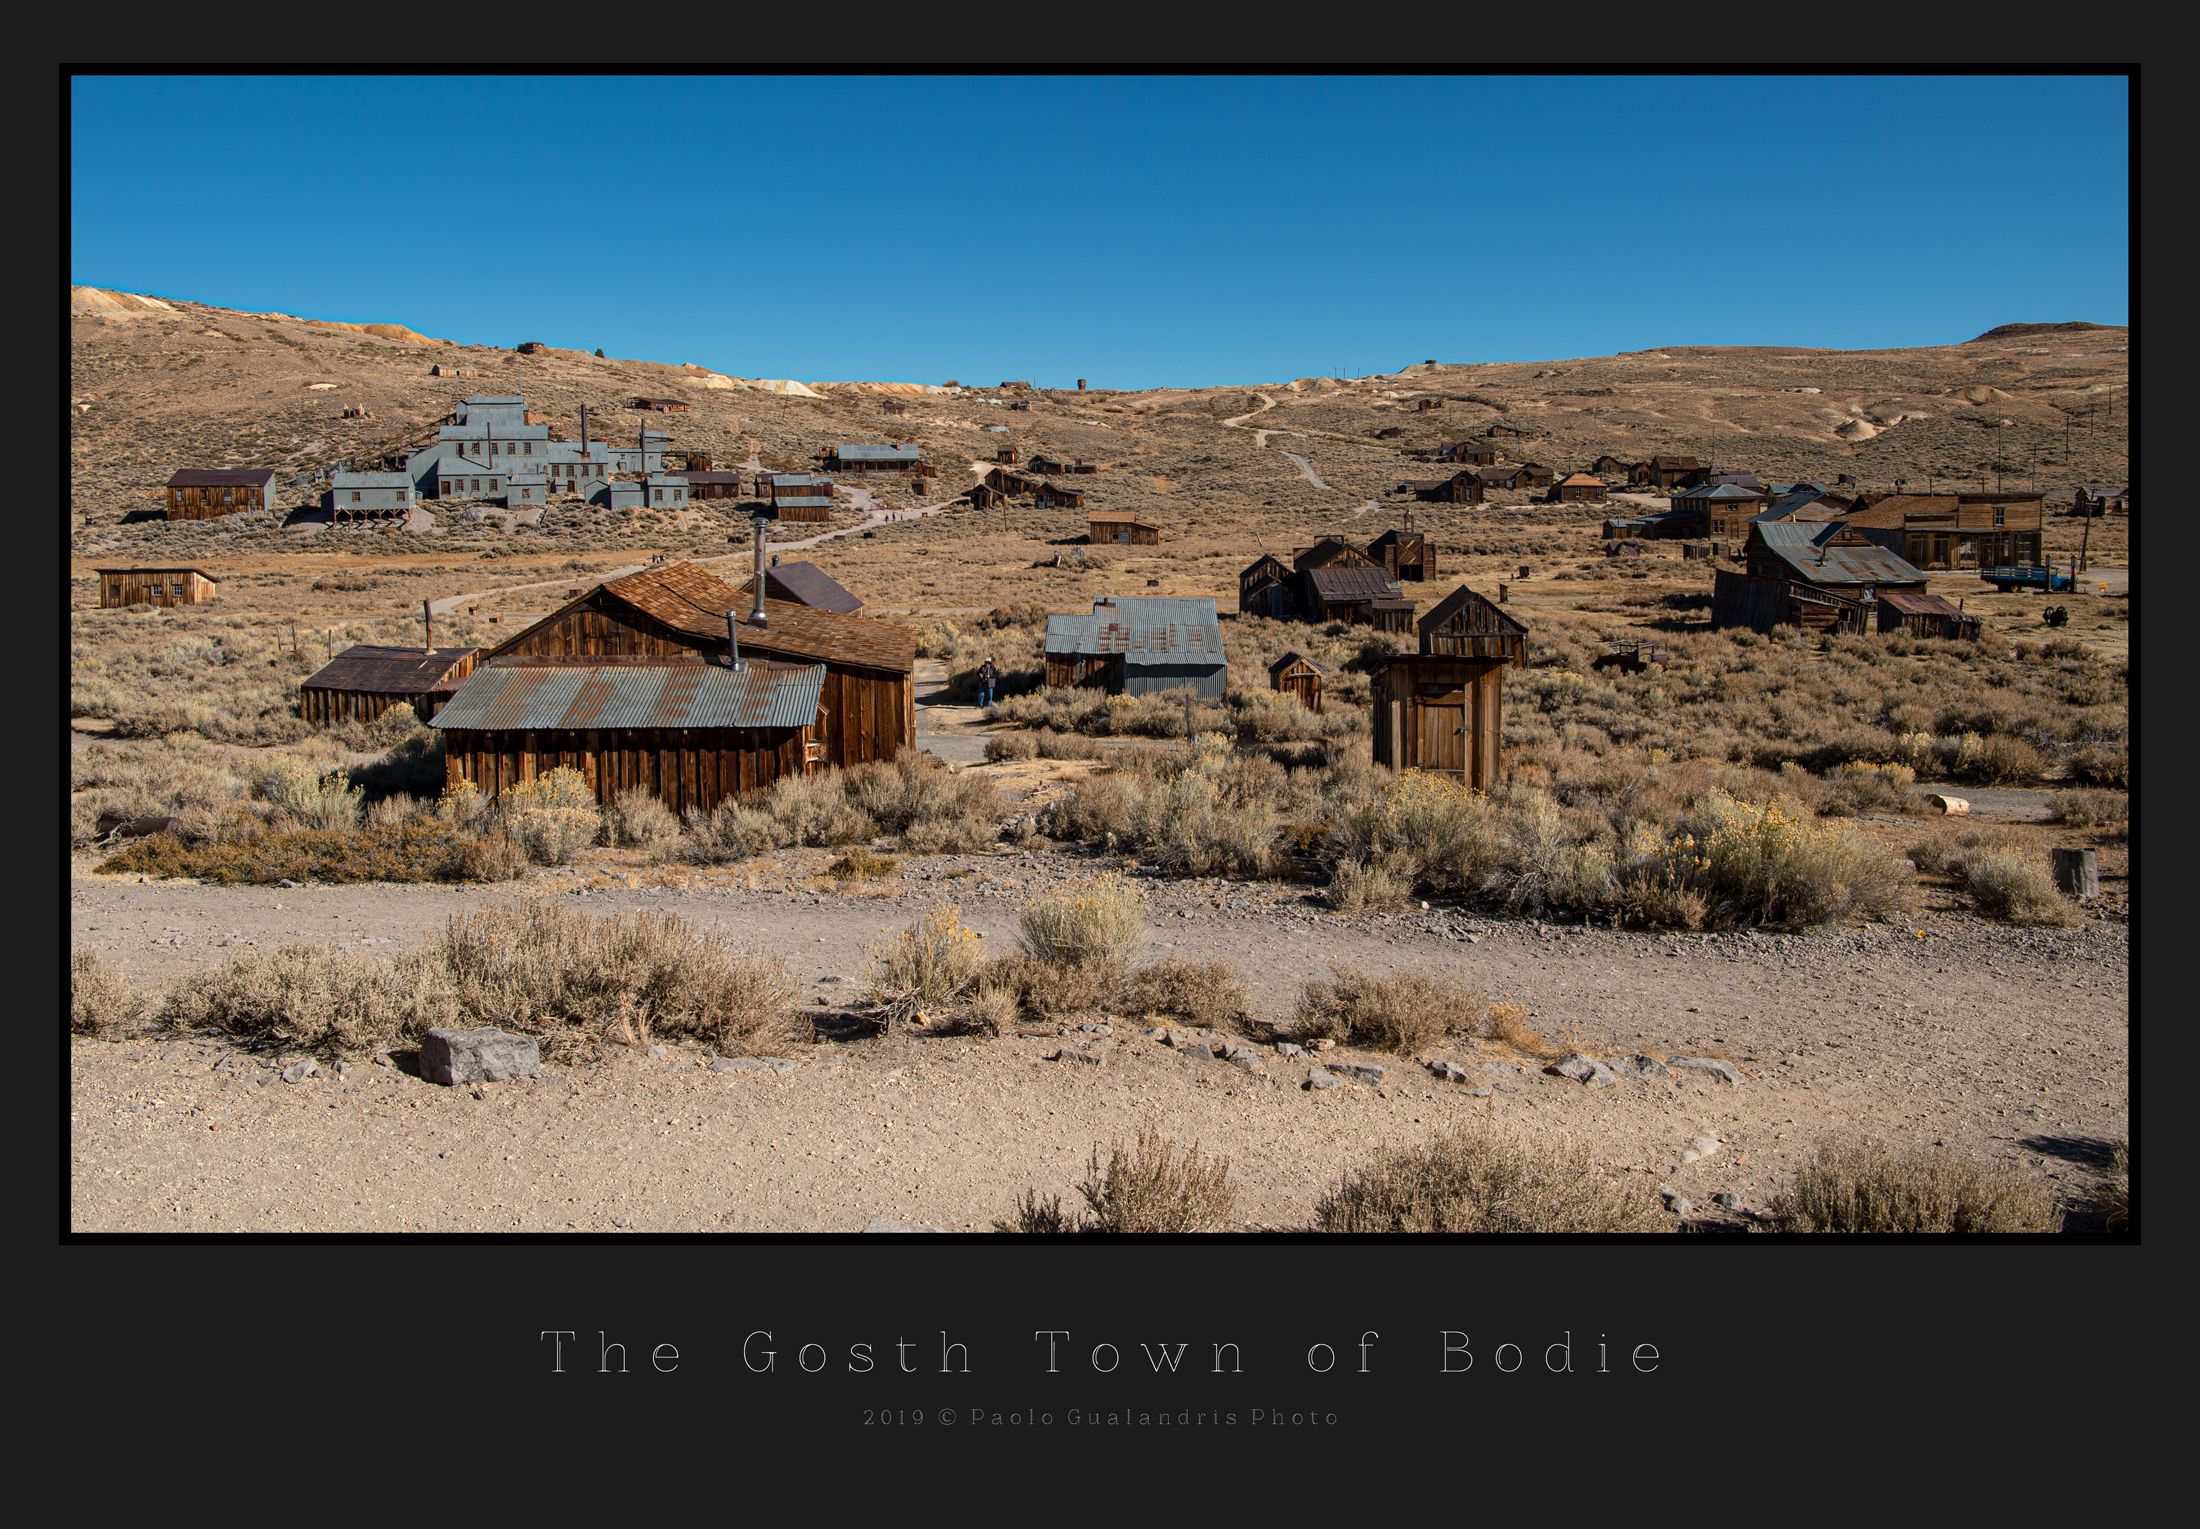 The Gosth Town of Bodie...